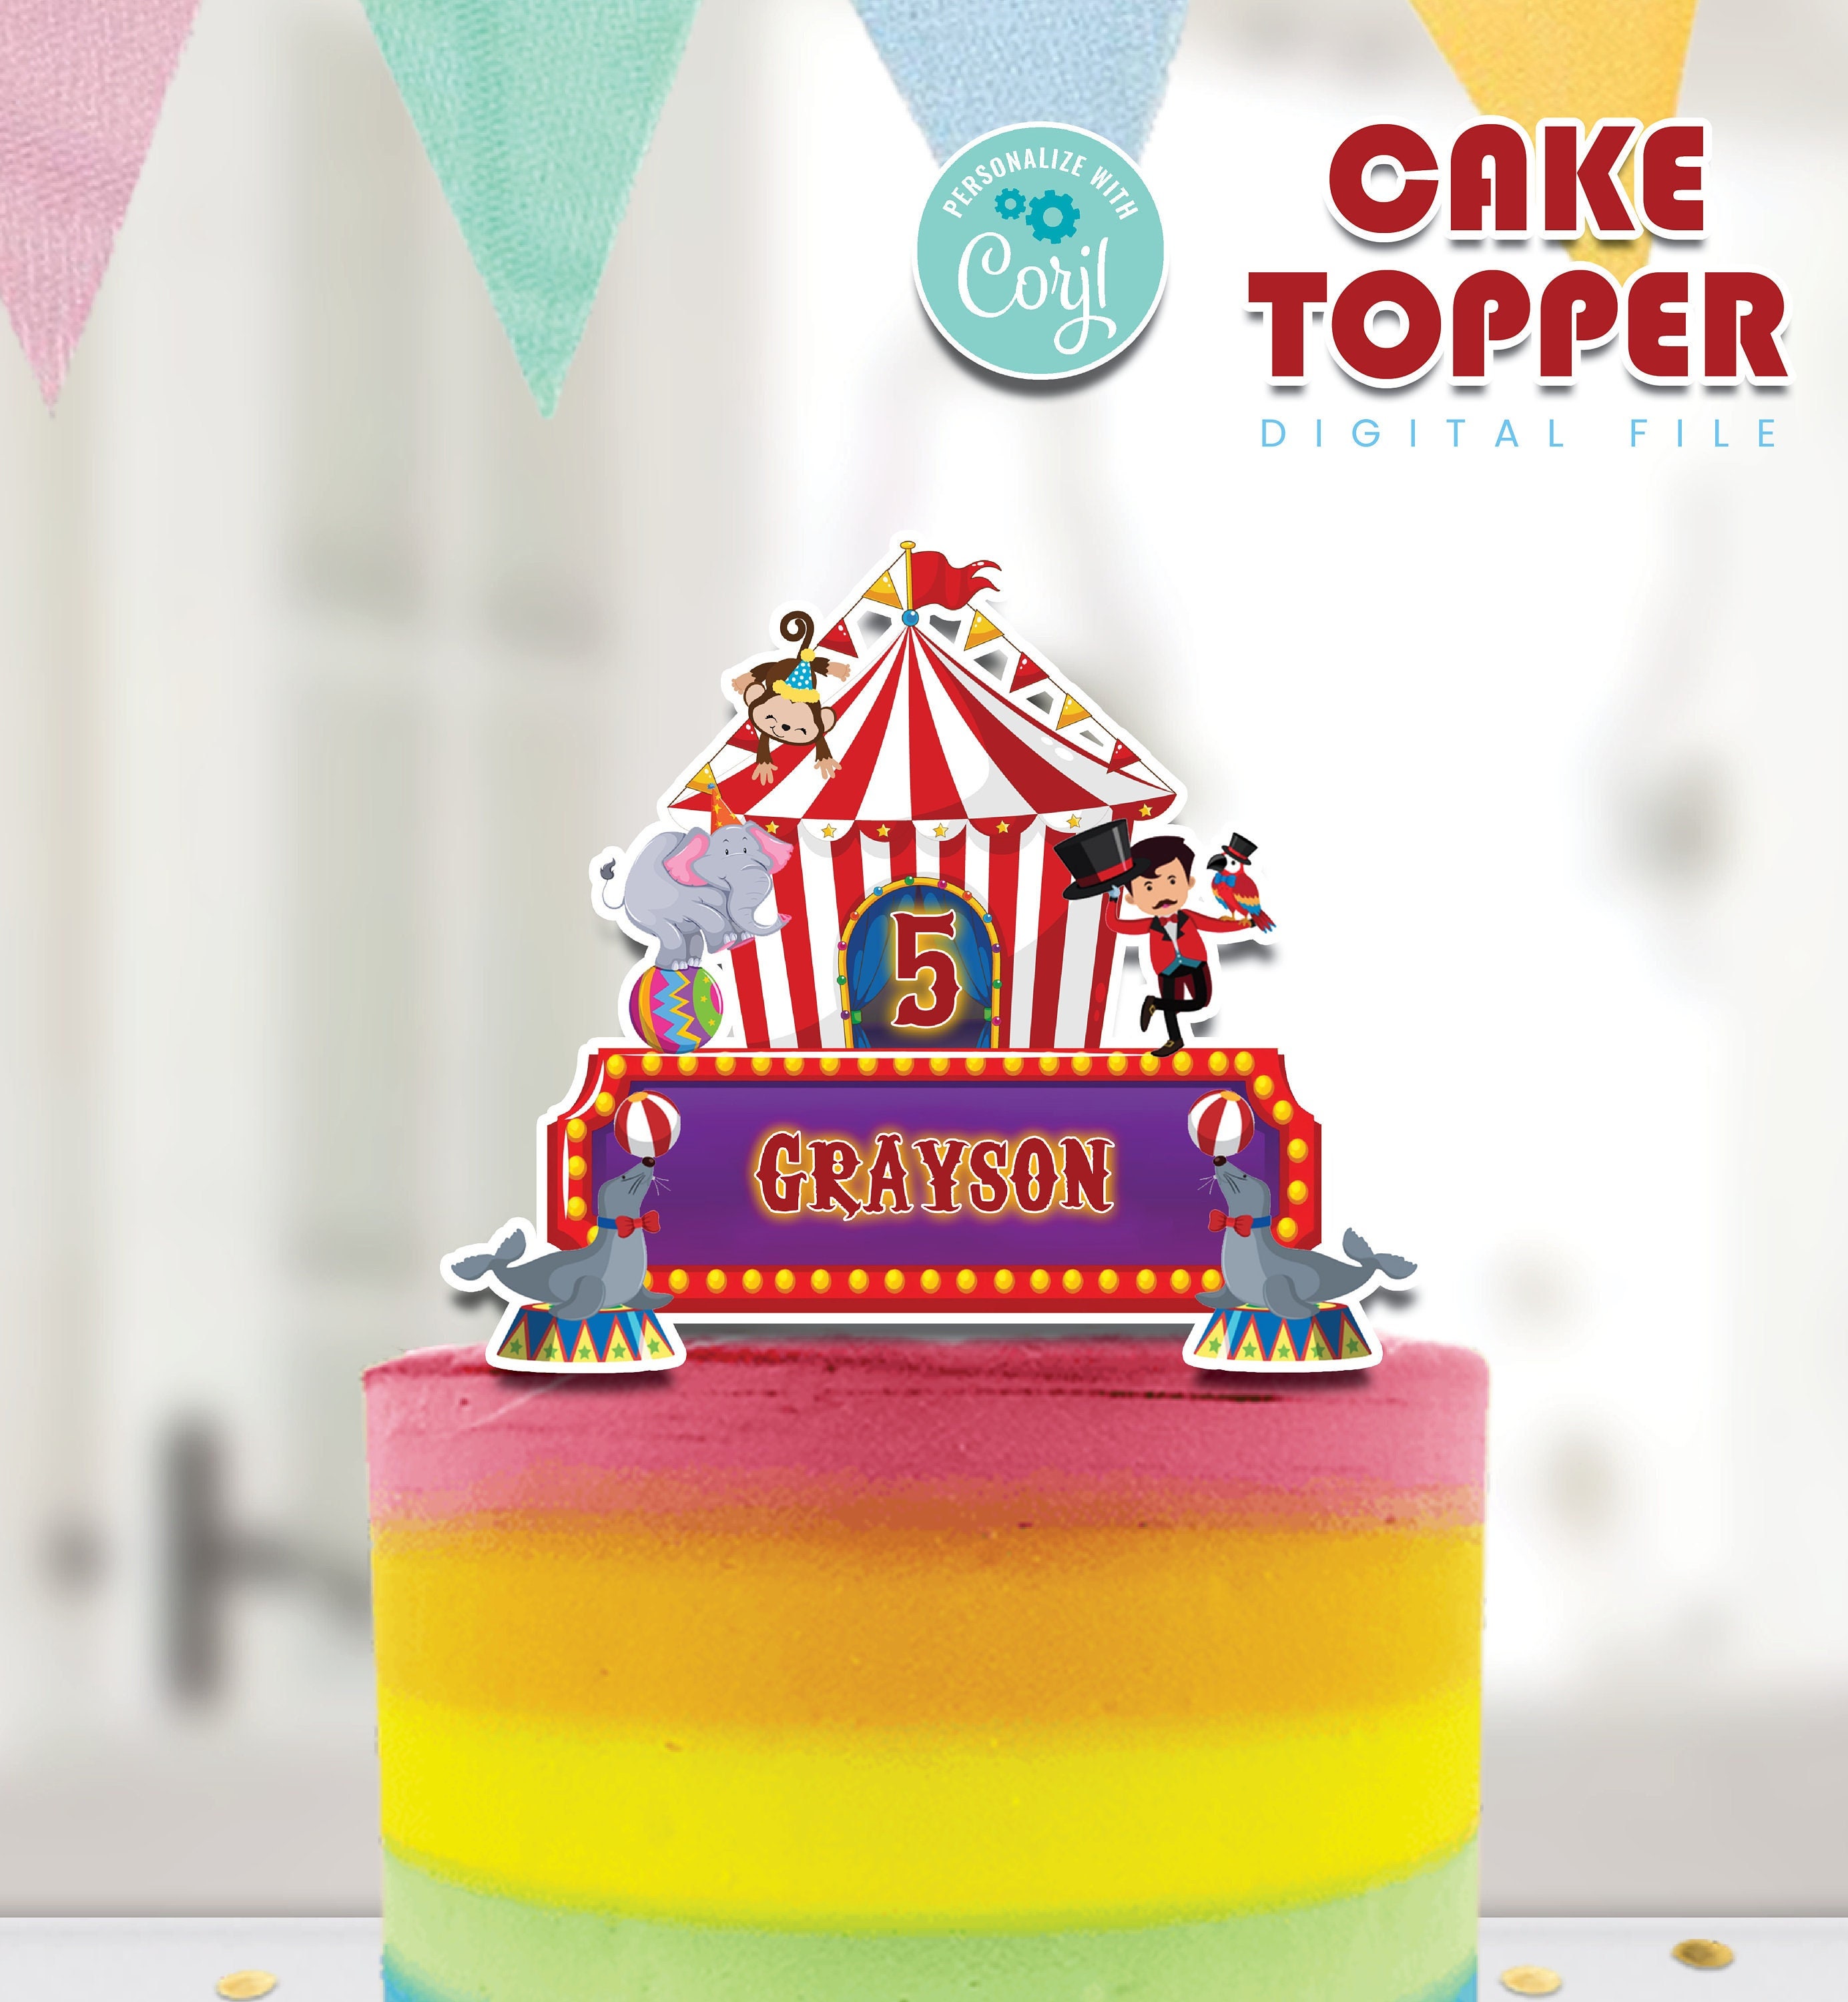 Circus Cake Toppers, Birthday Circus, Baking Supplies, Party Supplies